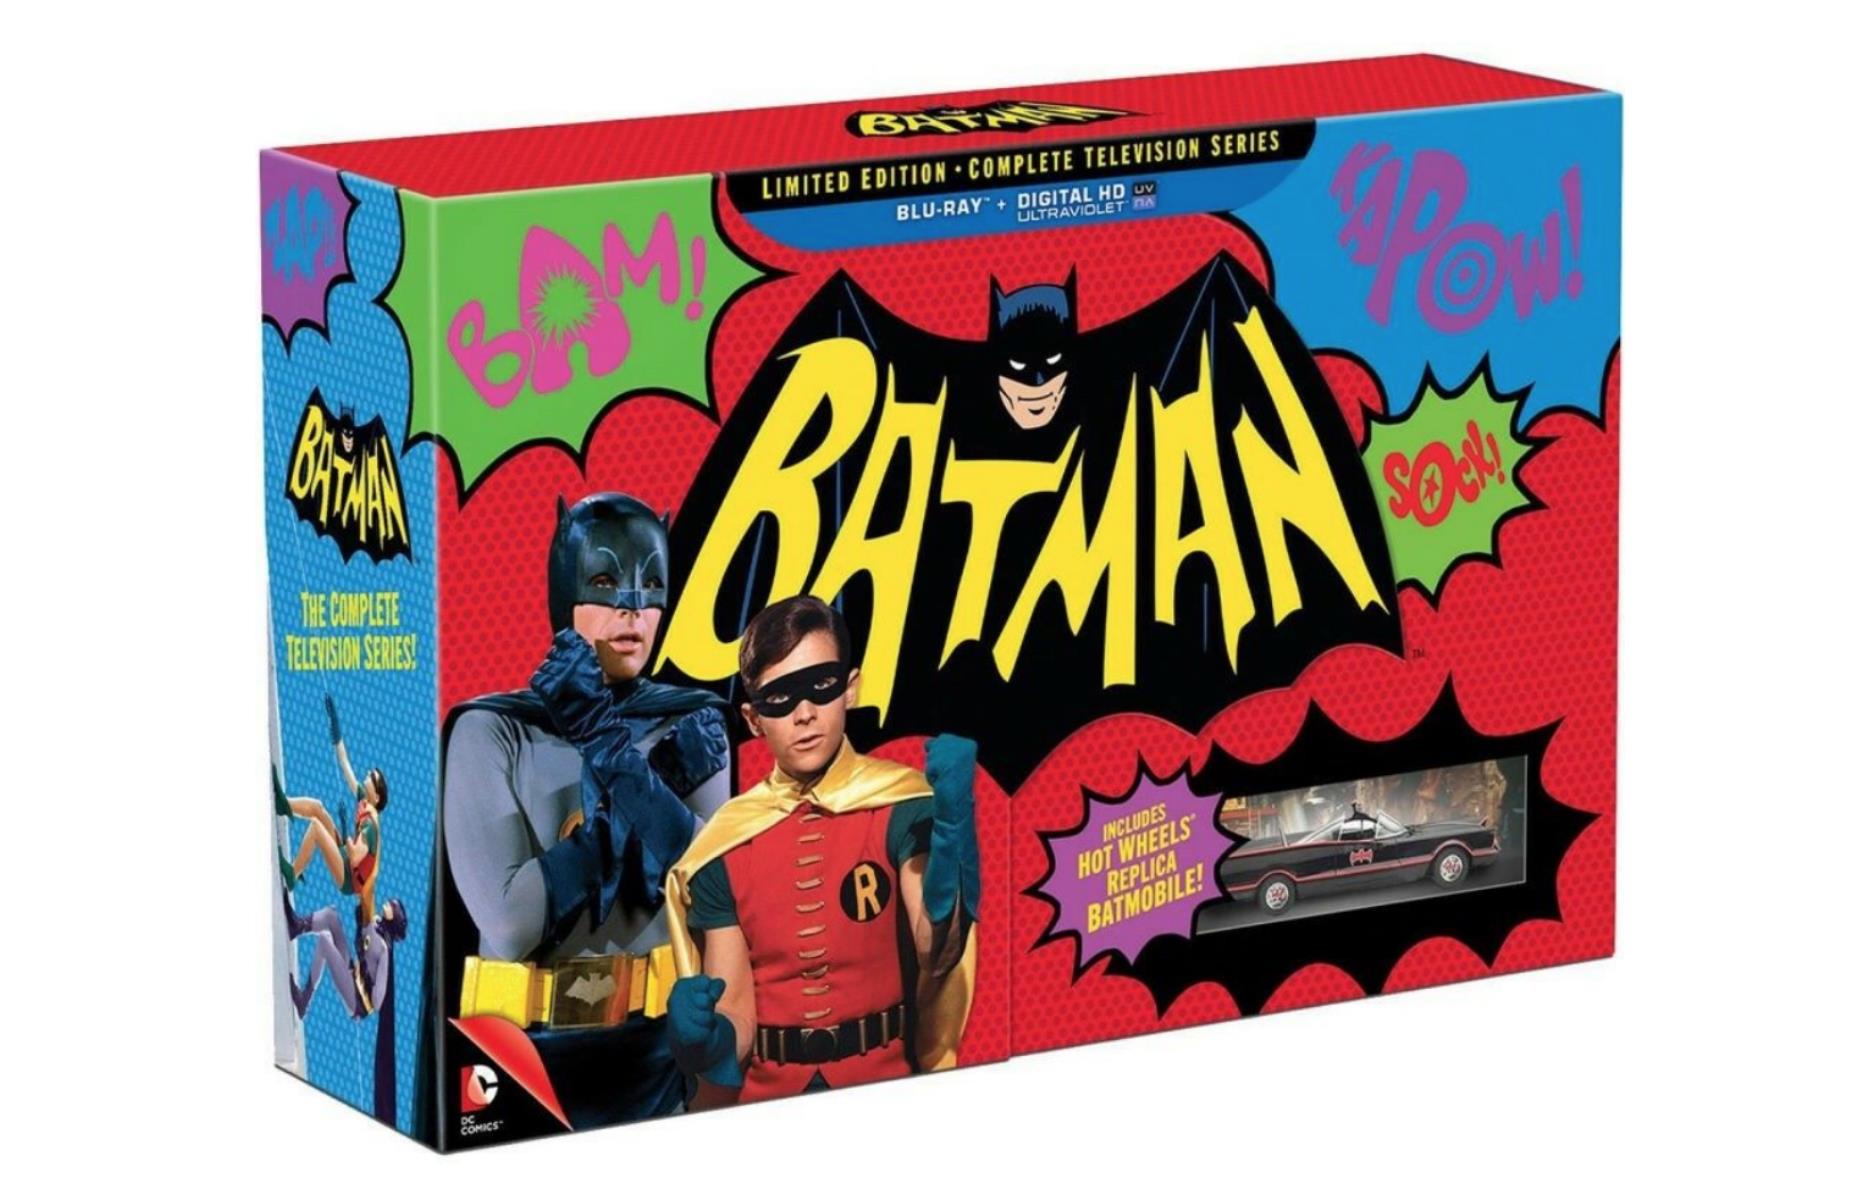 Batman: The Complete TV Series Blu-ray Box Set – up to $196 (£175)